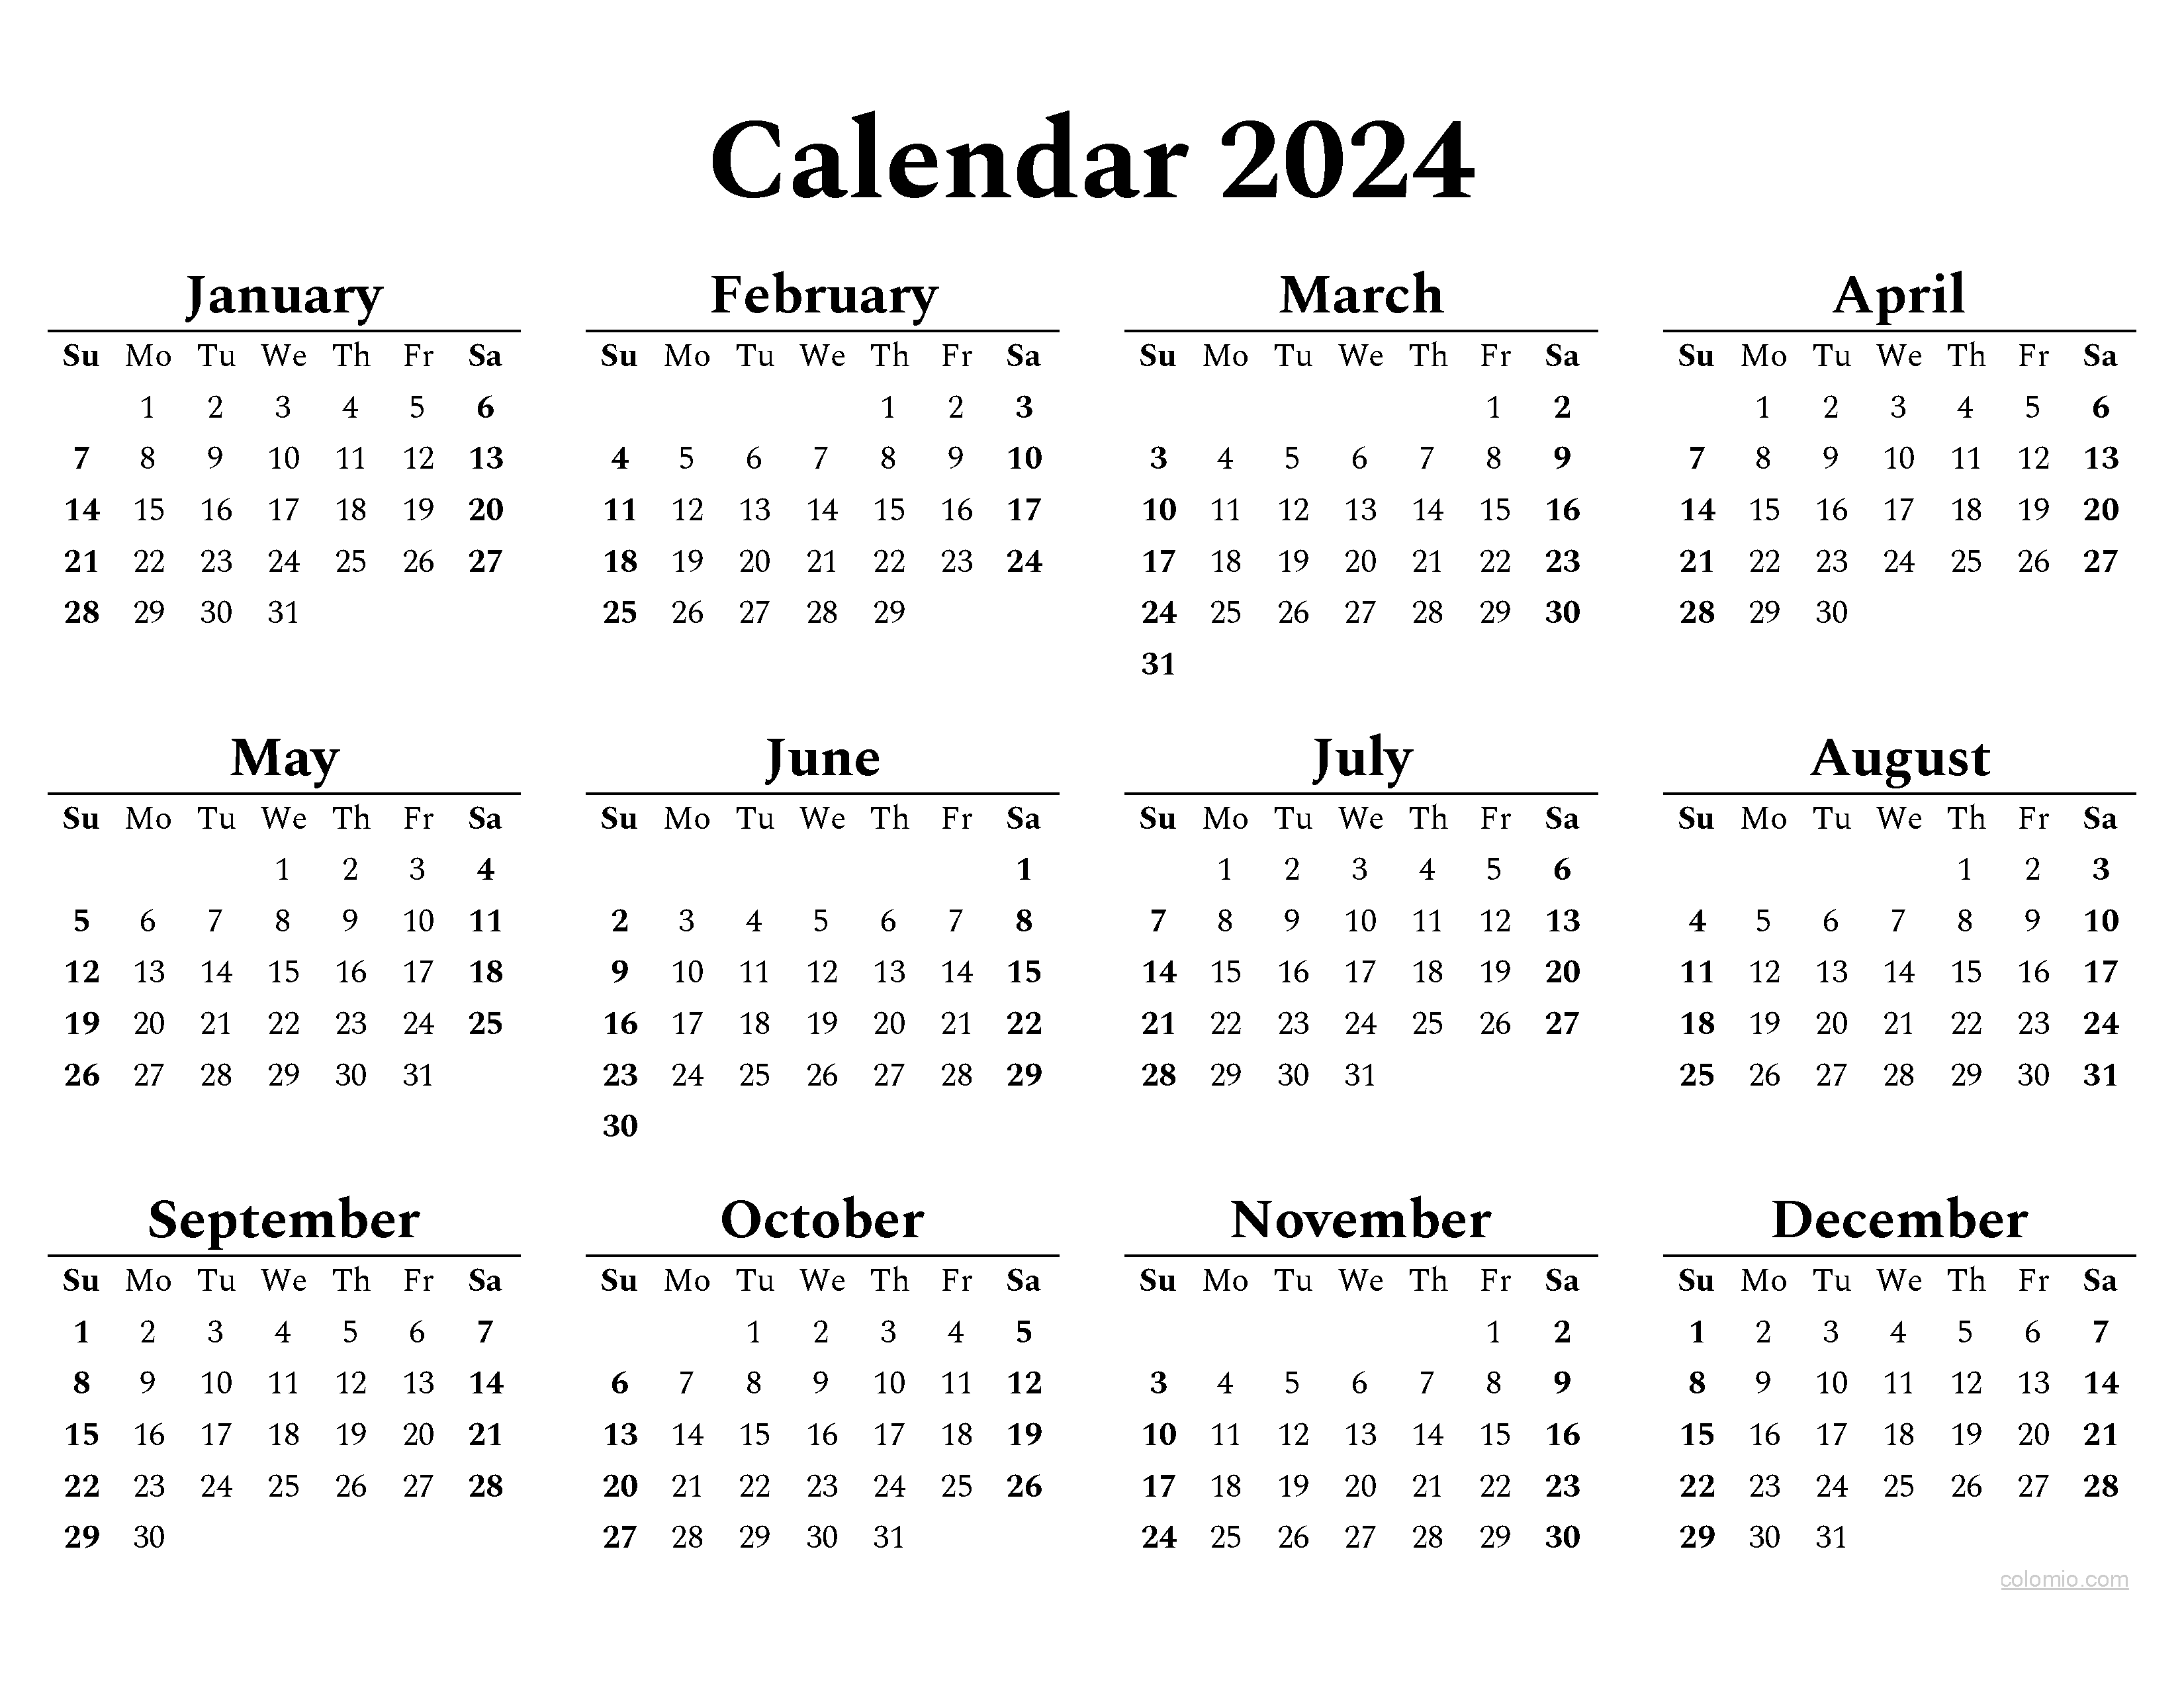 Calendar 2024 Template Pdf Fina Orelle - Free Printable 2024 Calendar With Holidays Month By Month